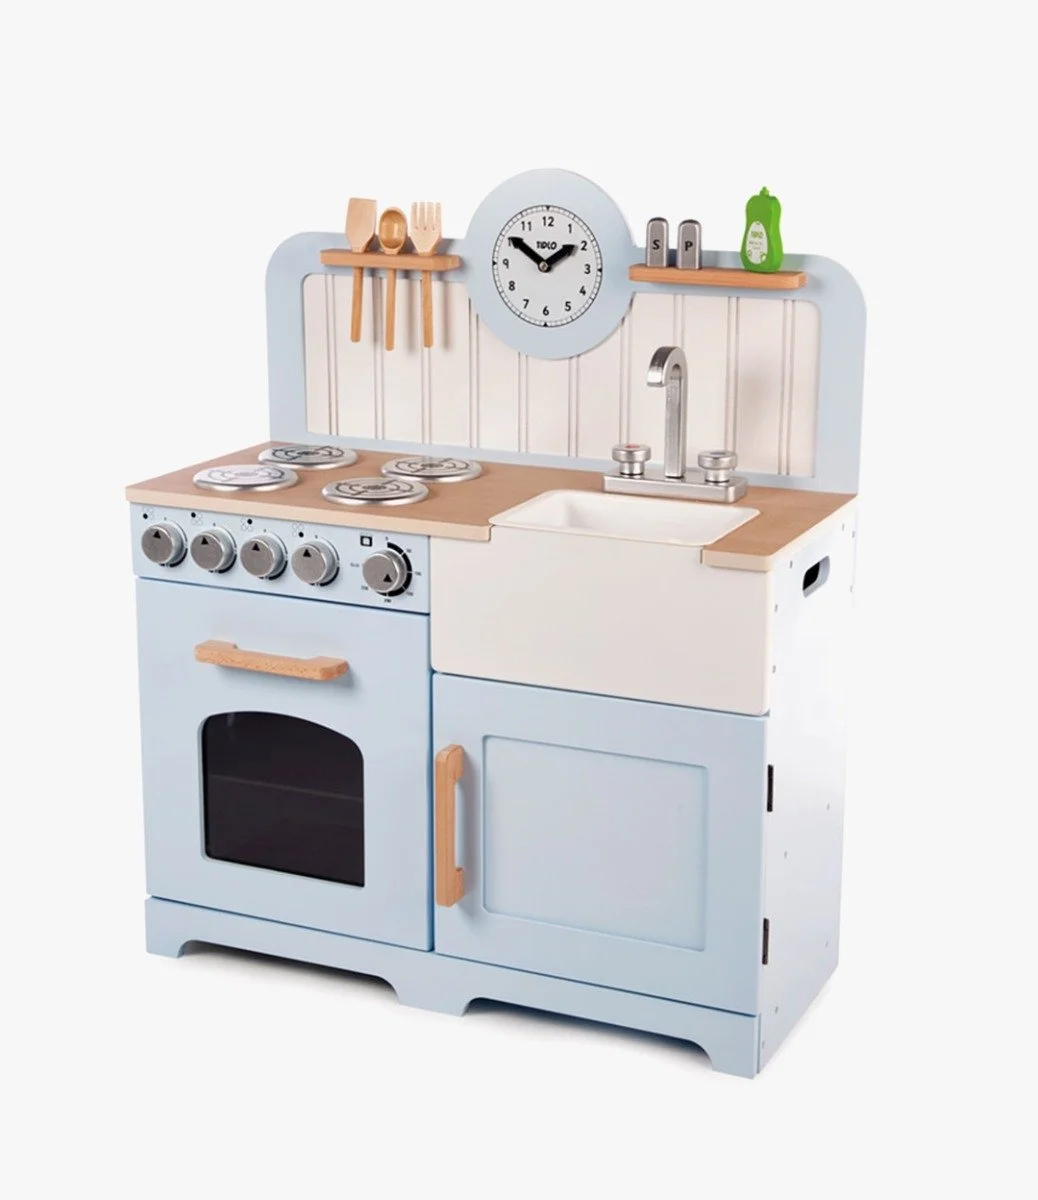 Country Play Kitchen - Blue by Tidlo